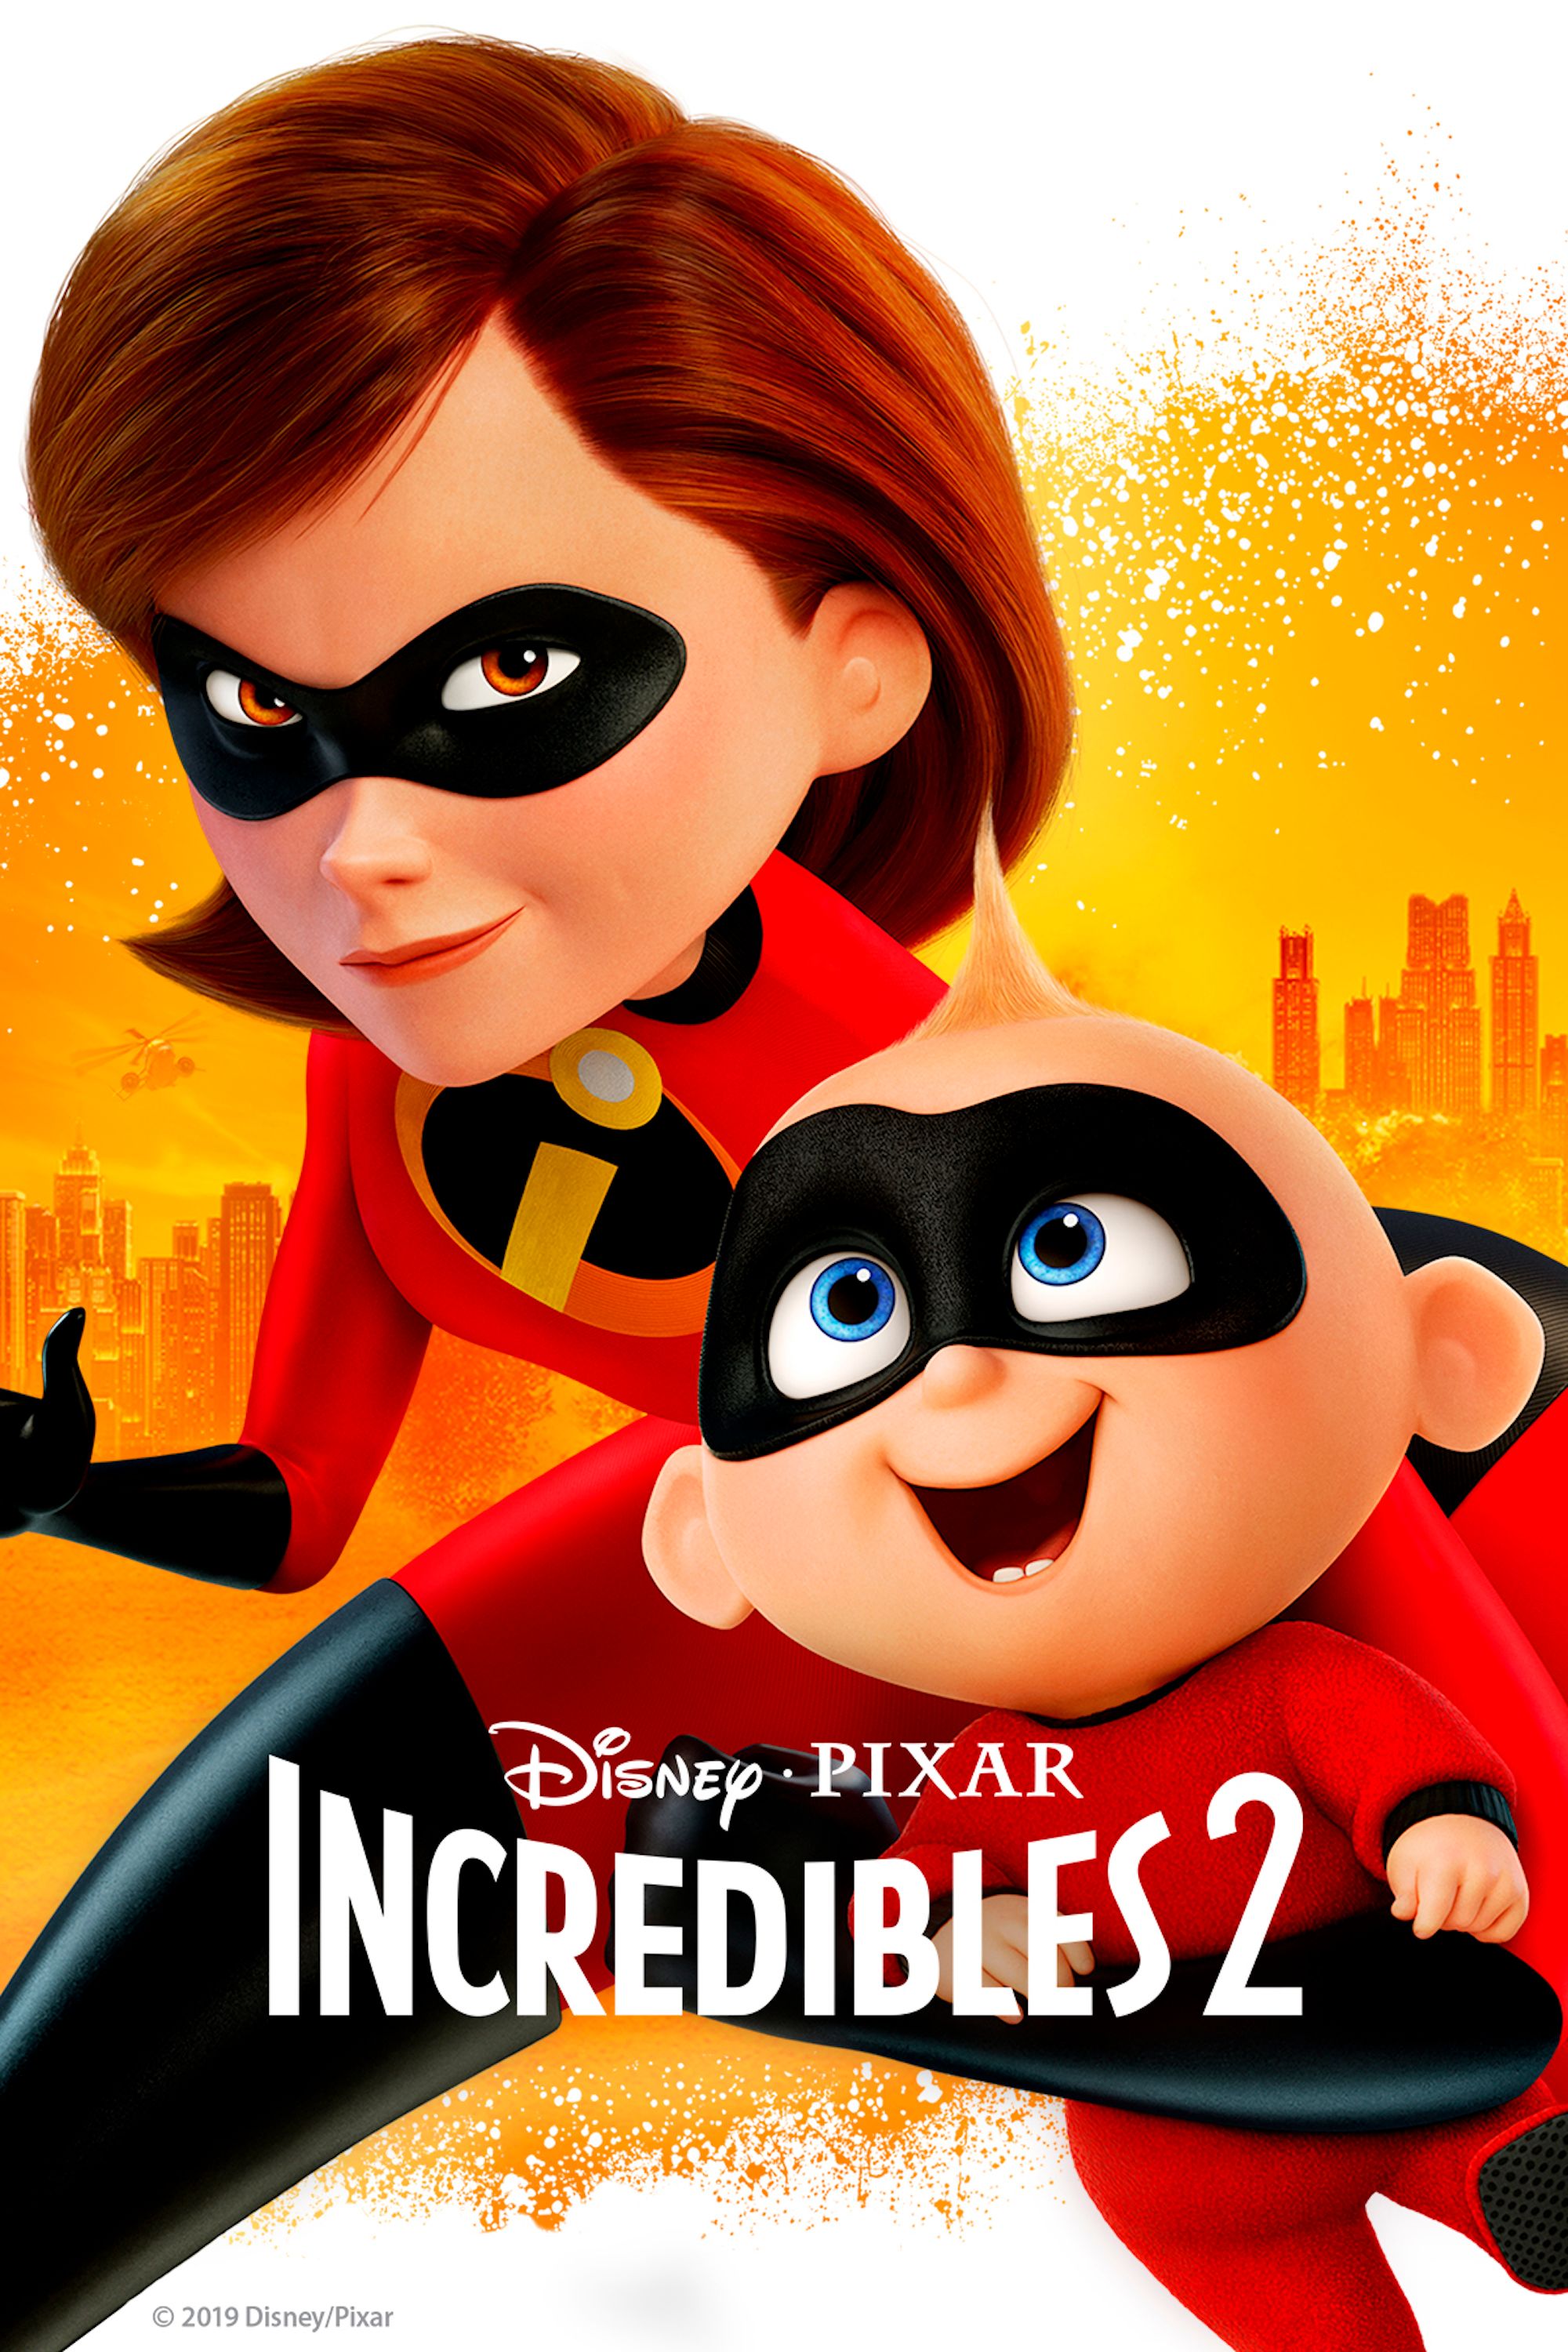 Incredibles 2 full movie free